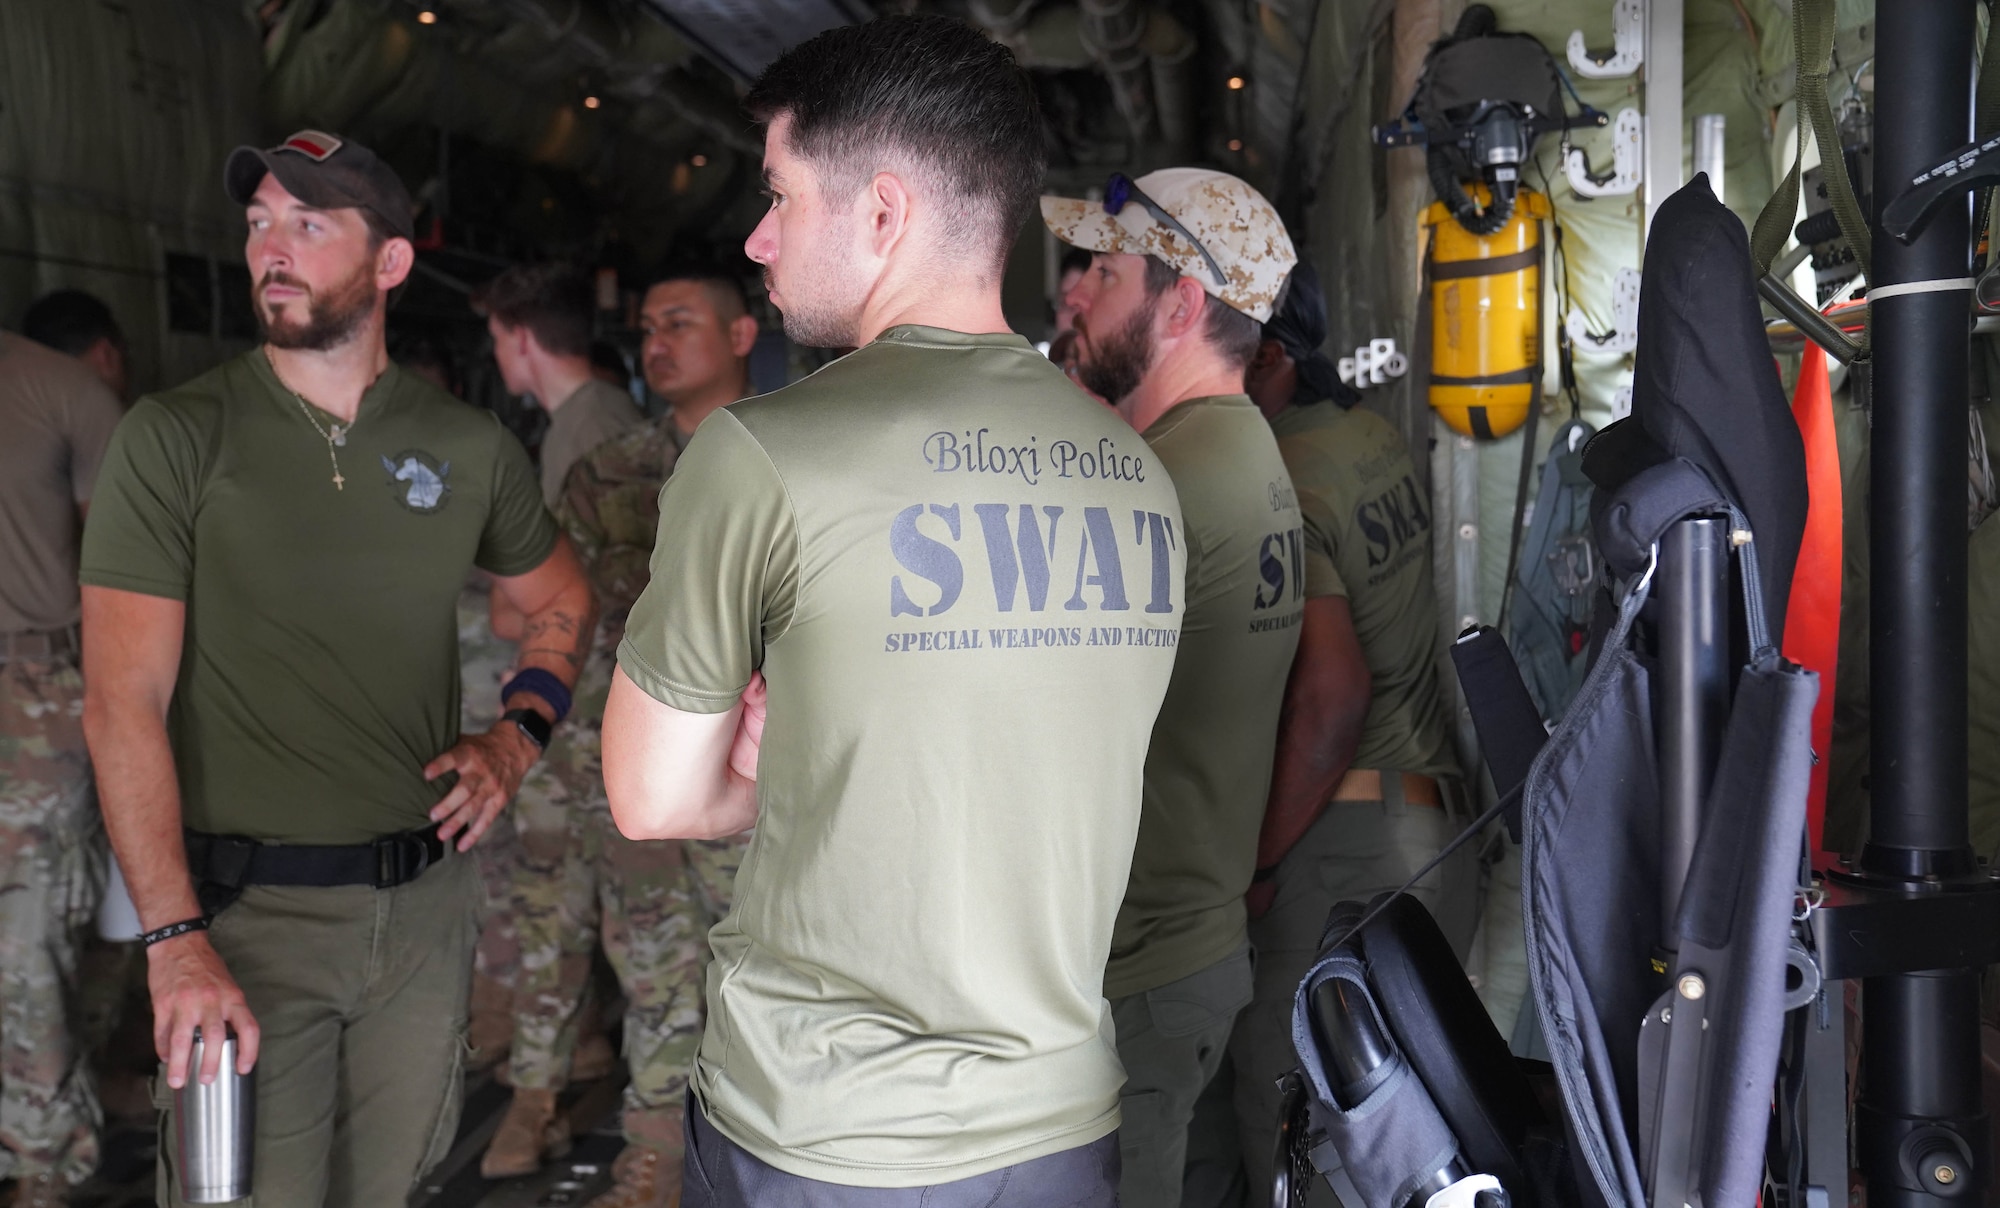 Nathan Lamberth and Steven Kinsey, Biloxi Special Weapons and Tactics officers, participate in a joint training with the 81st Security Forces Squadron aboard a C-130 at Keesler Air Force Base, Mississippi, May 9, 2022. Security forces and Biloxi SWAT members trained together on aircraft anti-hijacking procedures.